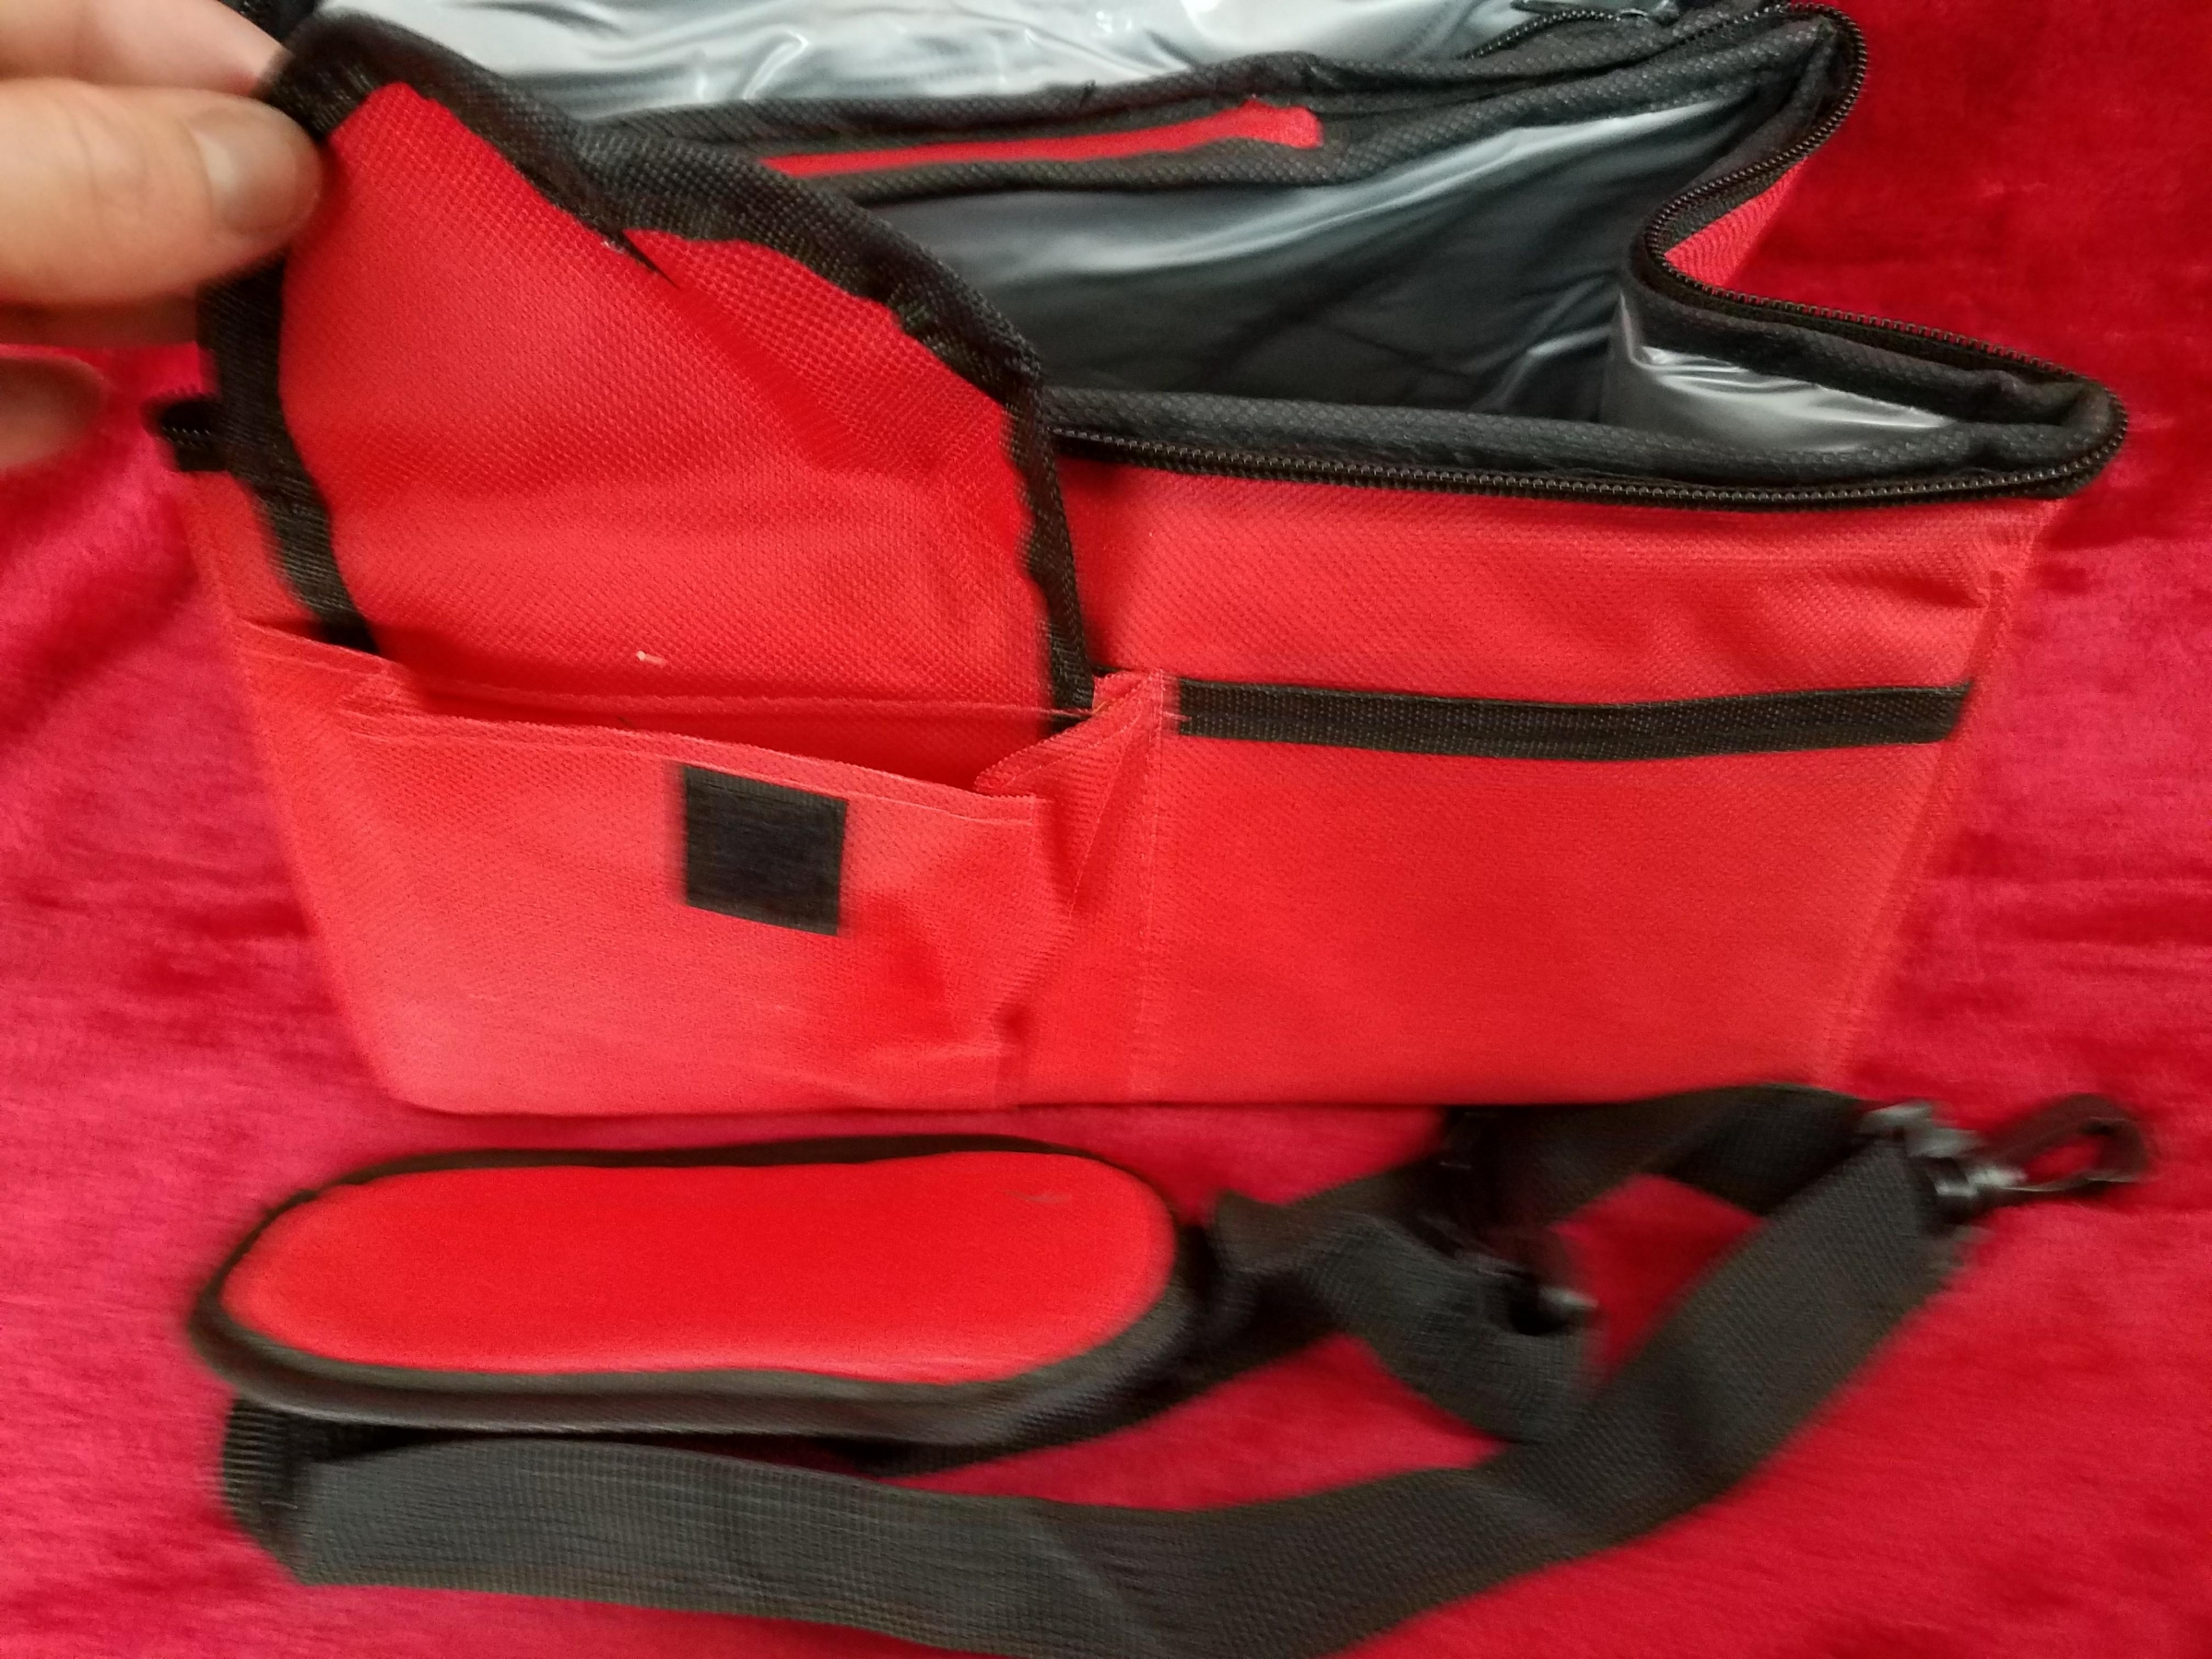 Luxurious, lovely, vibrant red lunch bag is well insulated, waterproof, very high quality, portable, has padded handle AND a long shoulder strap, perfect for all occasions!